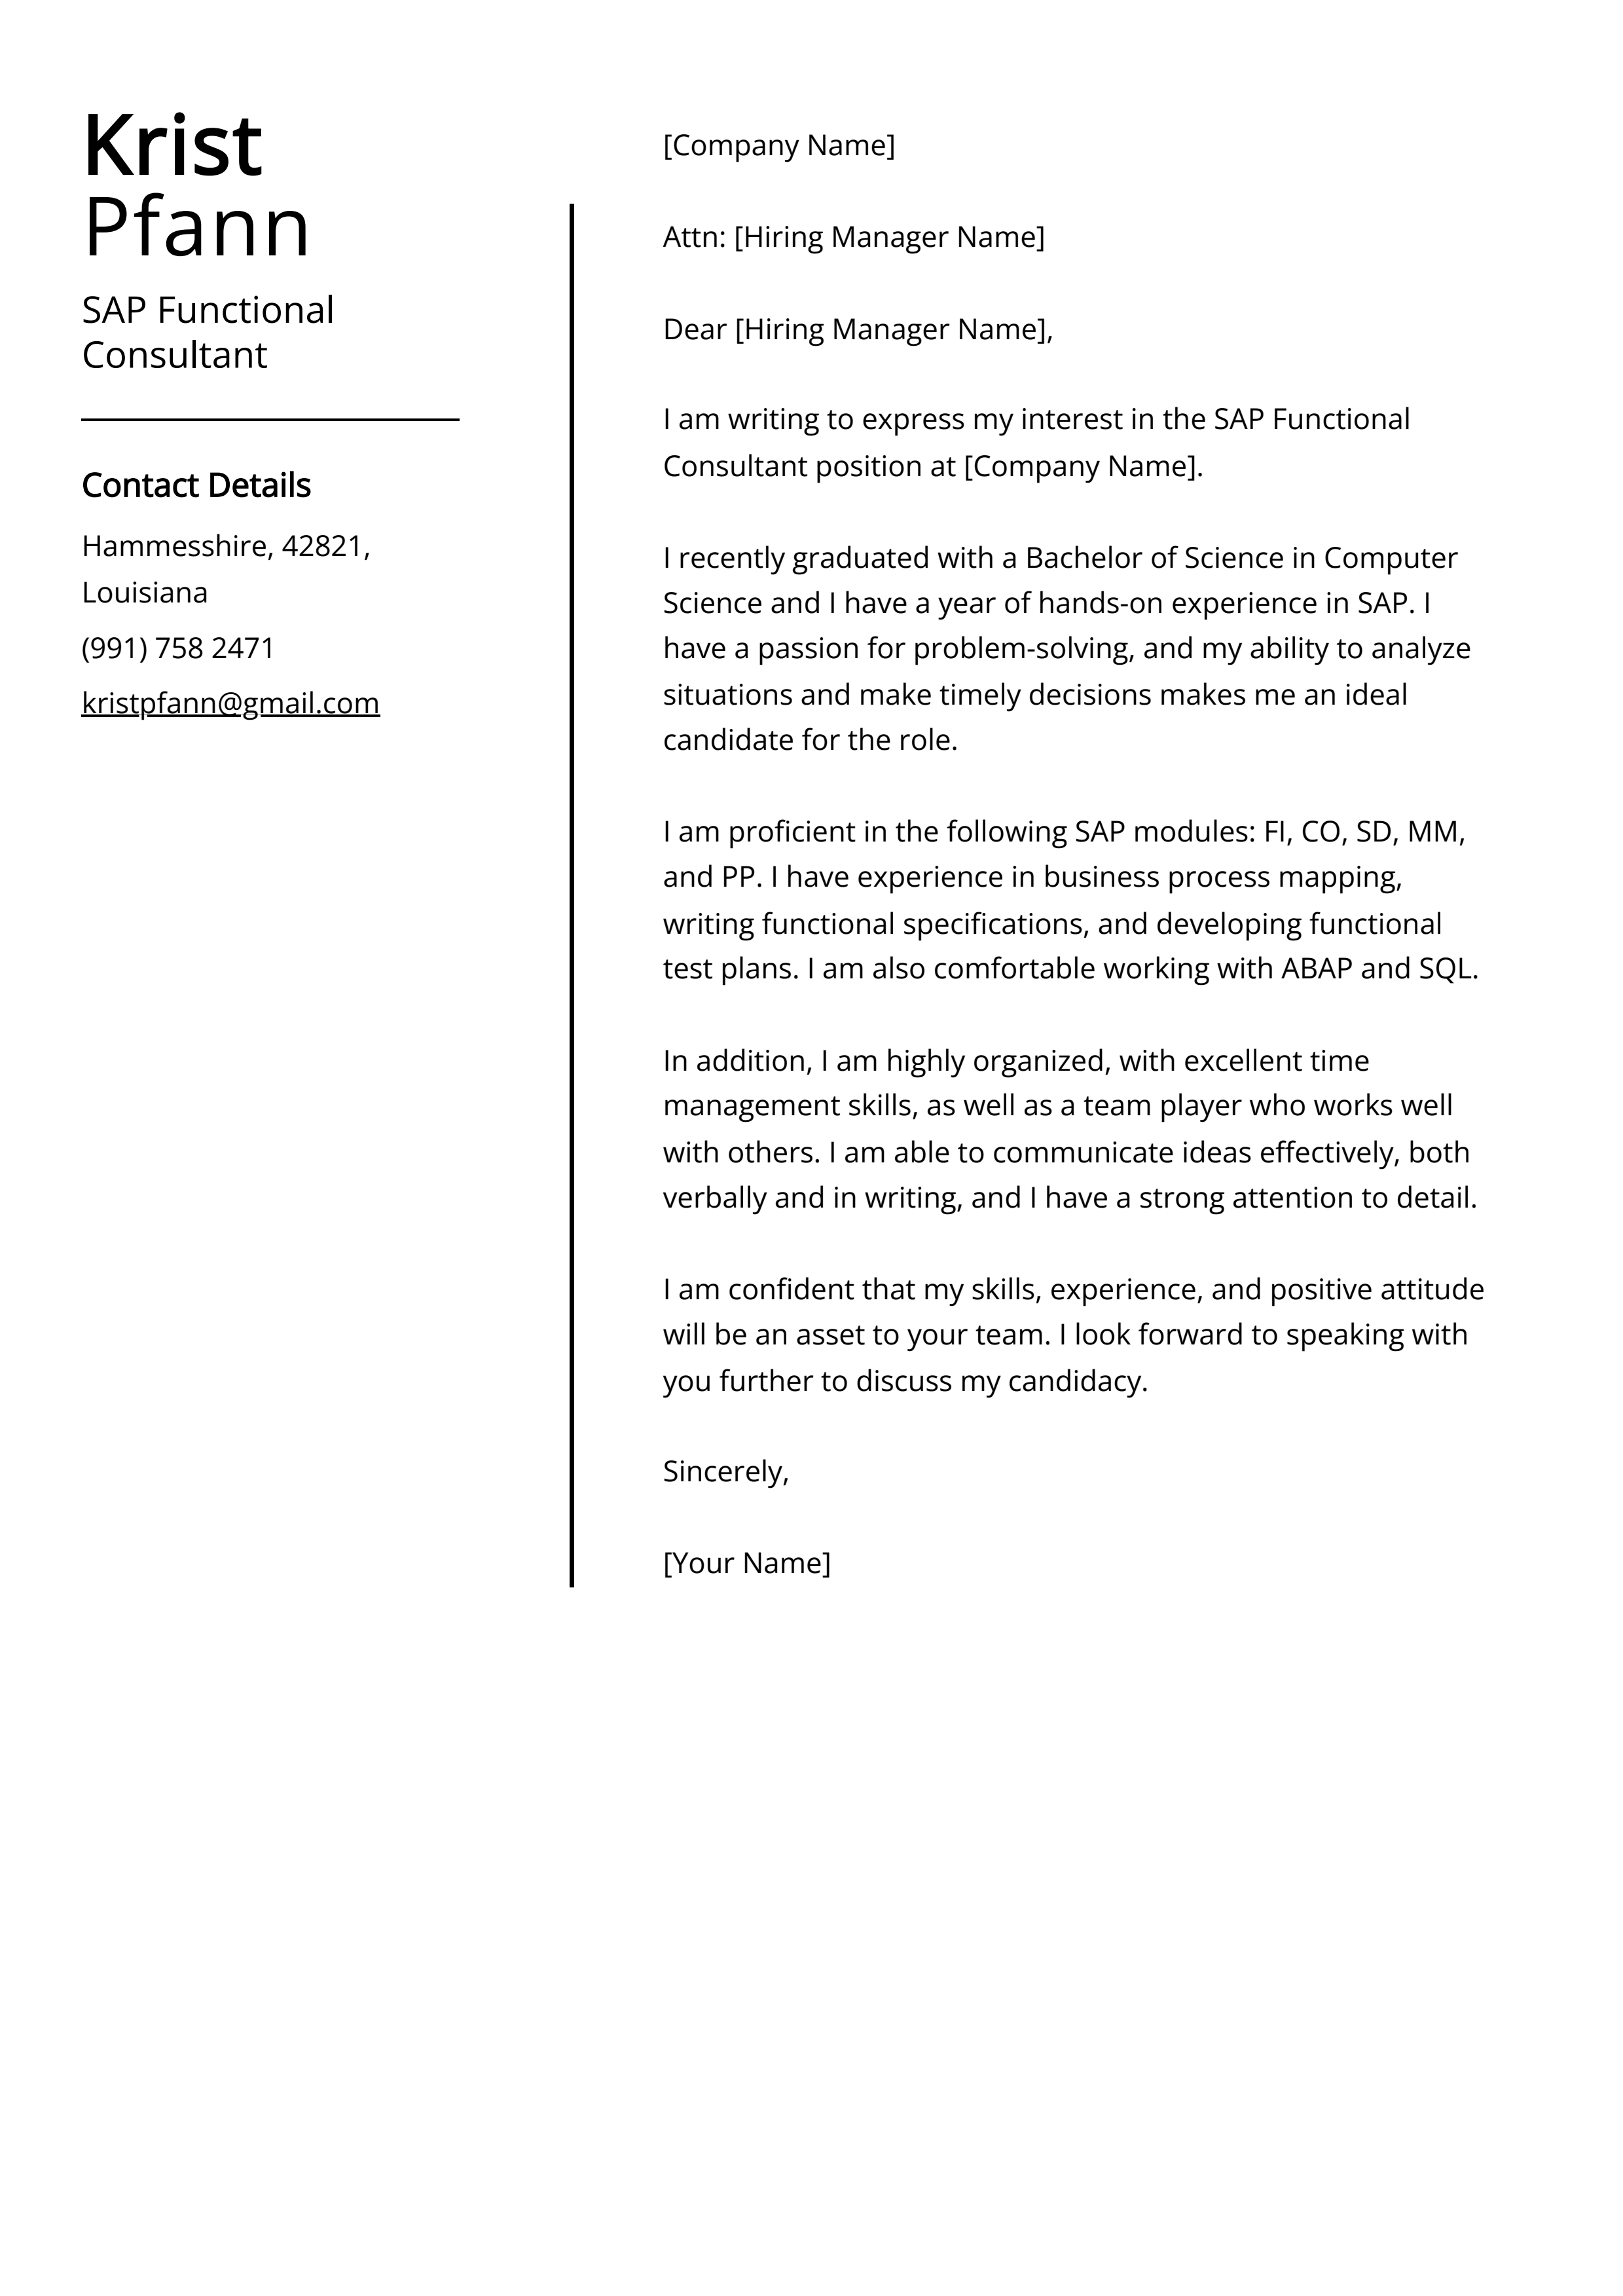 SAP Functional Consultant Cover Letter Example